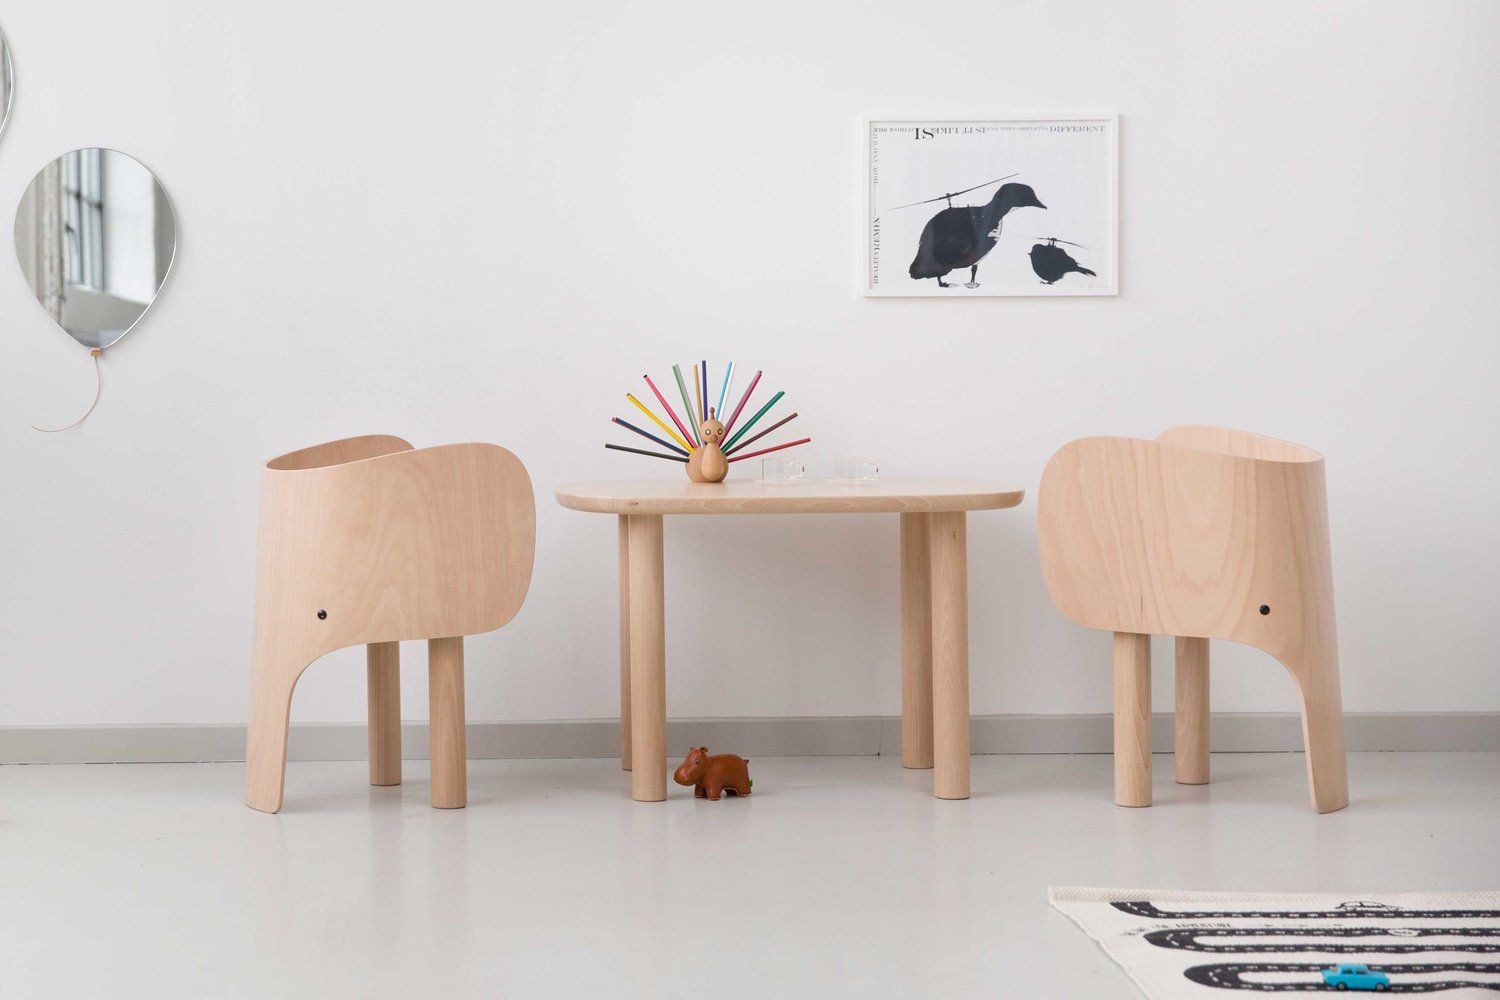 Designers Love This Elephant-Shaped Kids' Chair - EO Elephant Chair